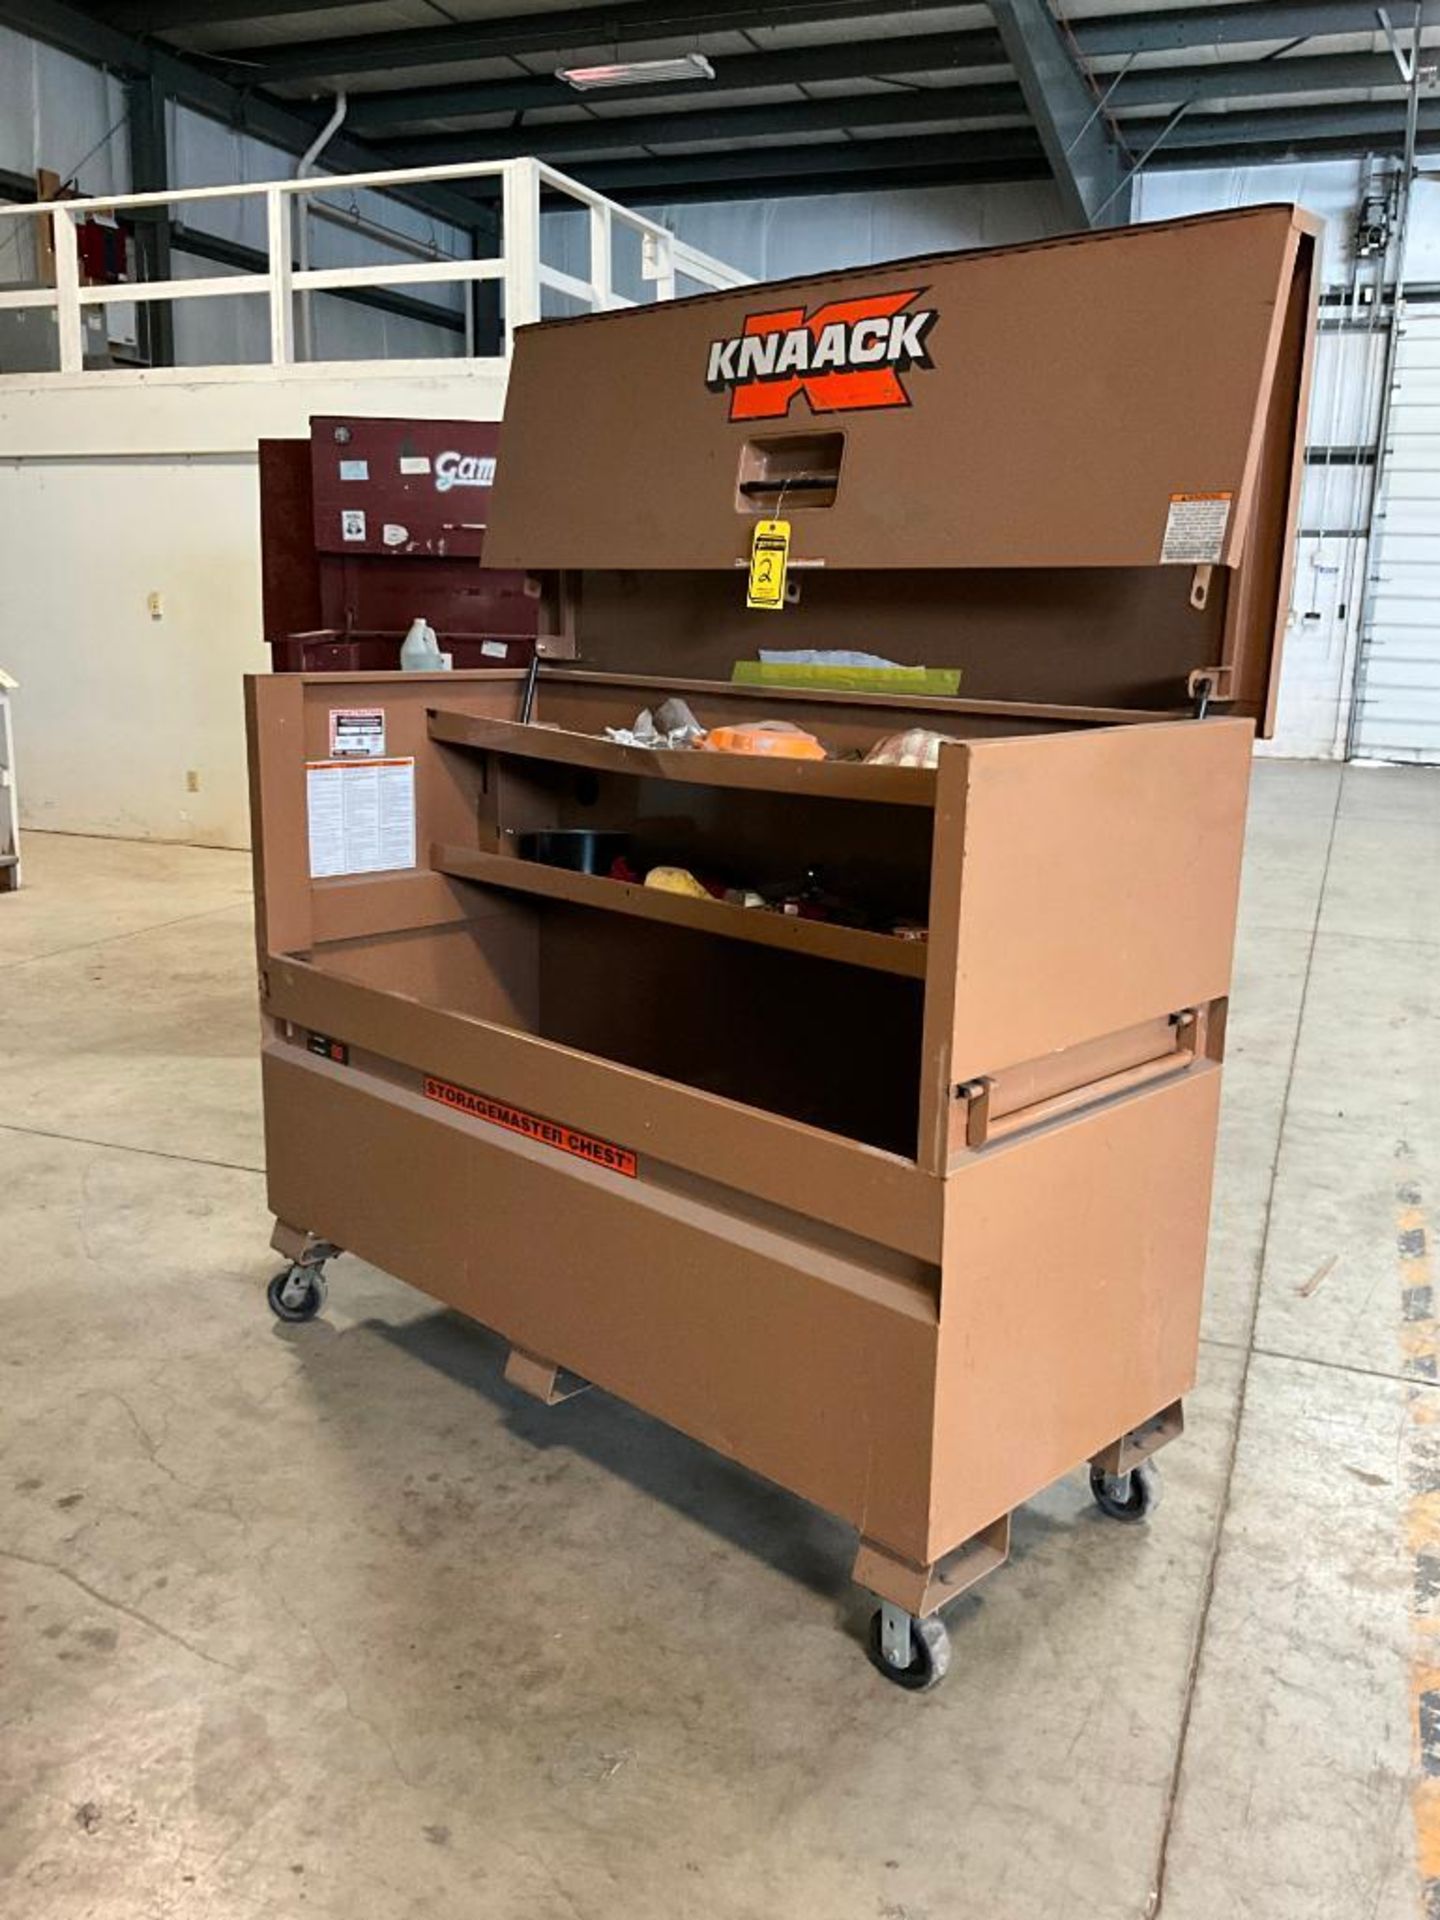 Knaack Gang Box w/ Contents, 30" L x 72" W x 56" H - Image 4 of 14